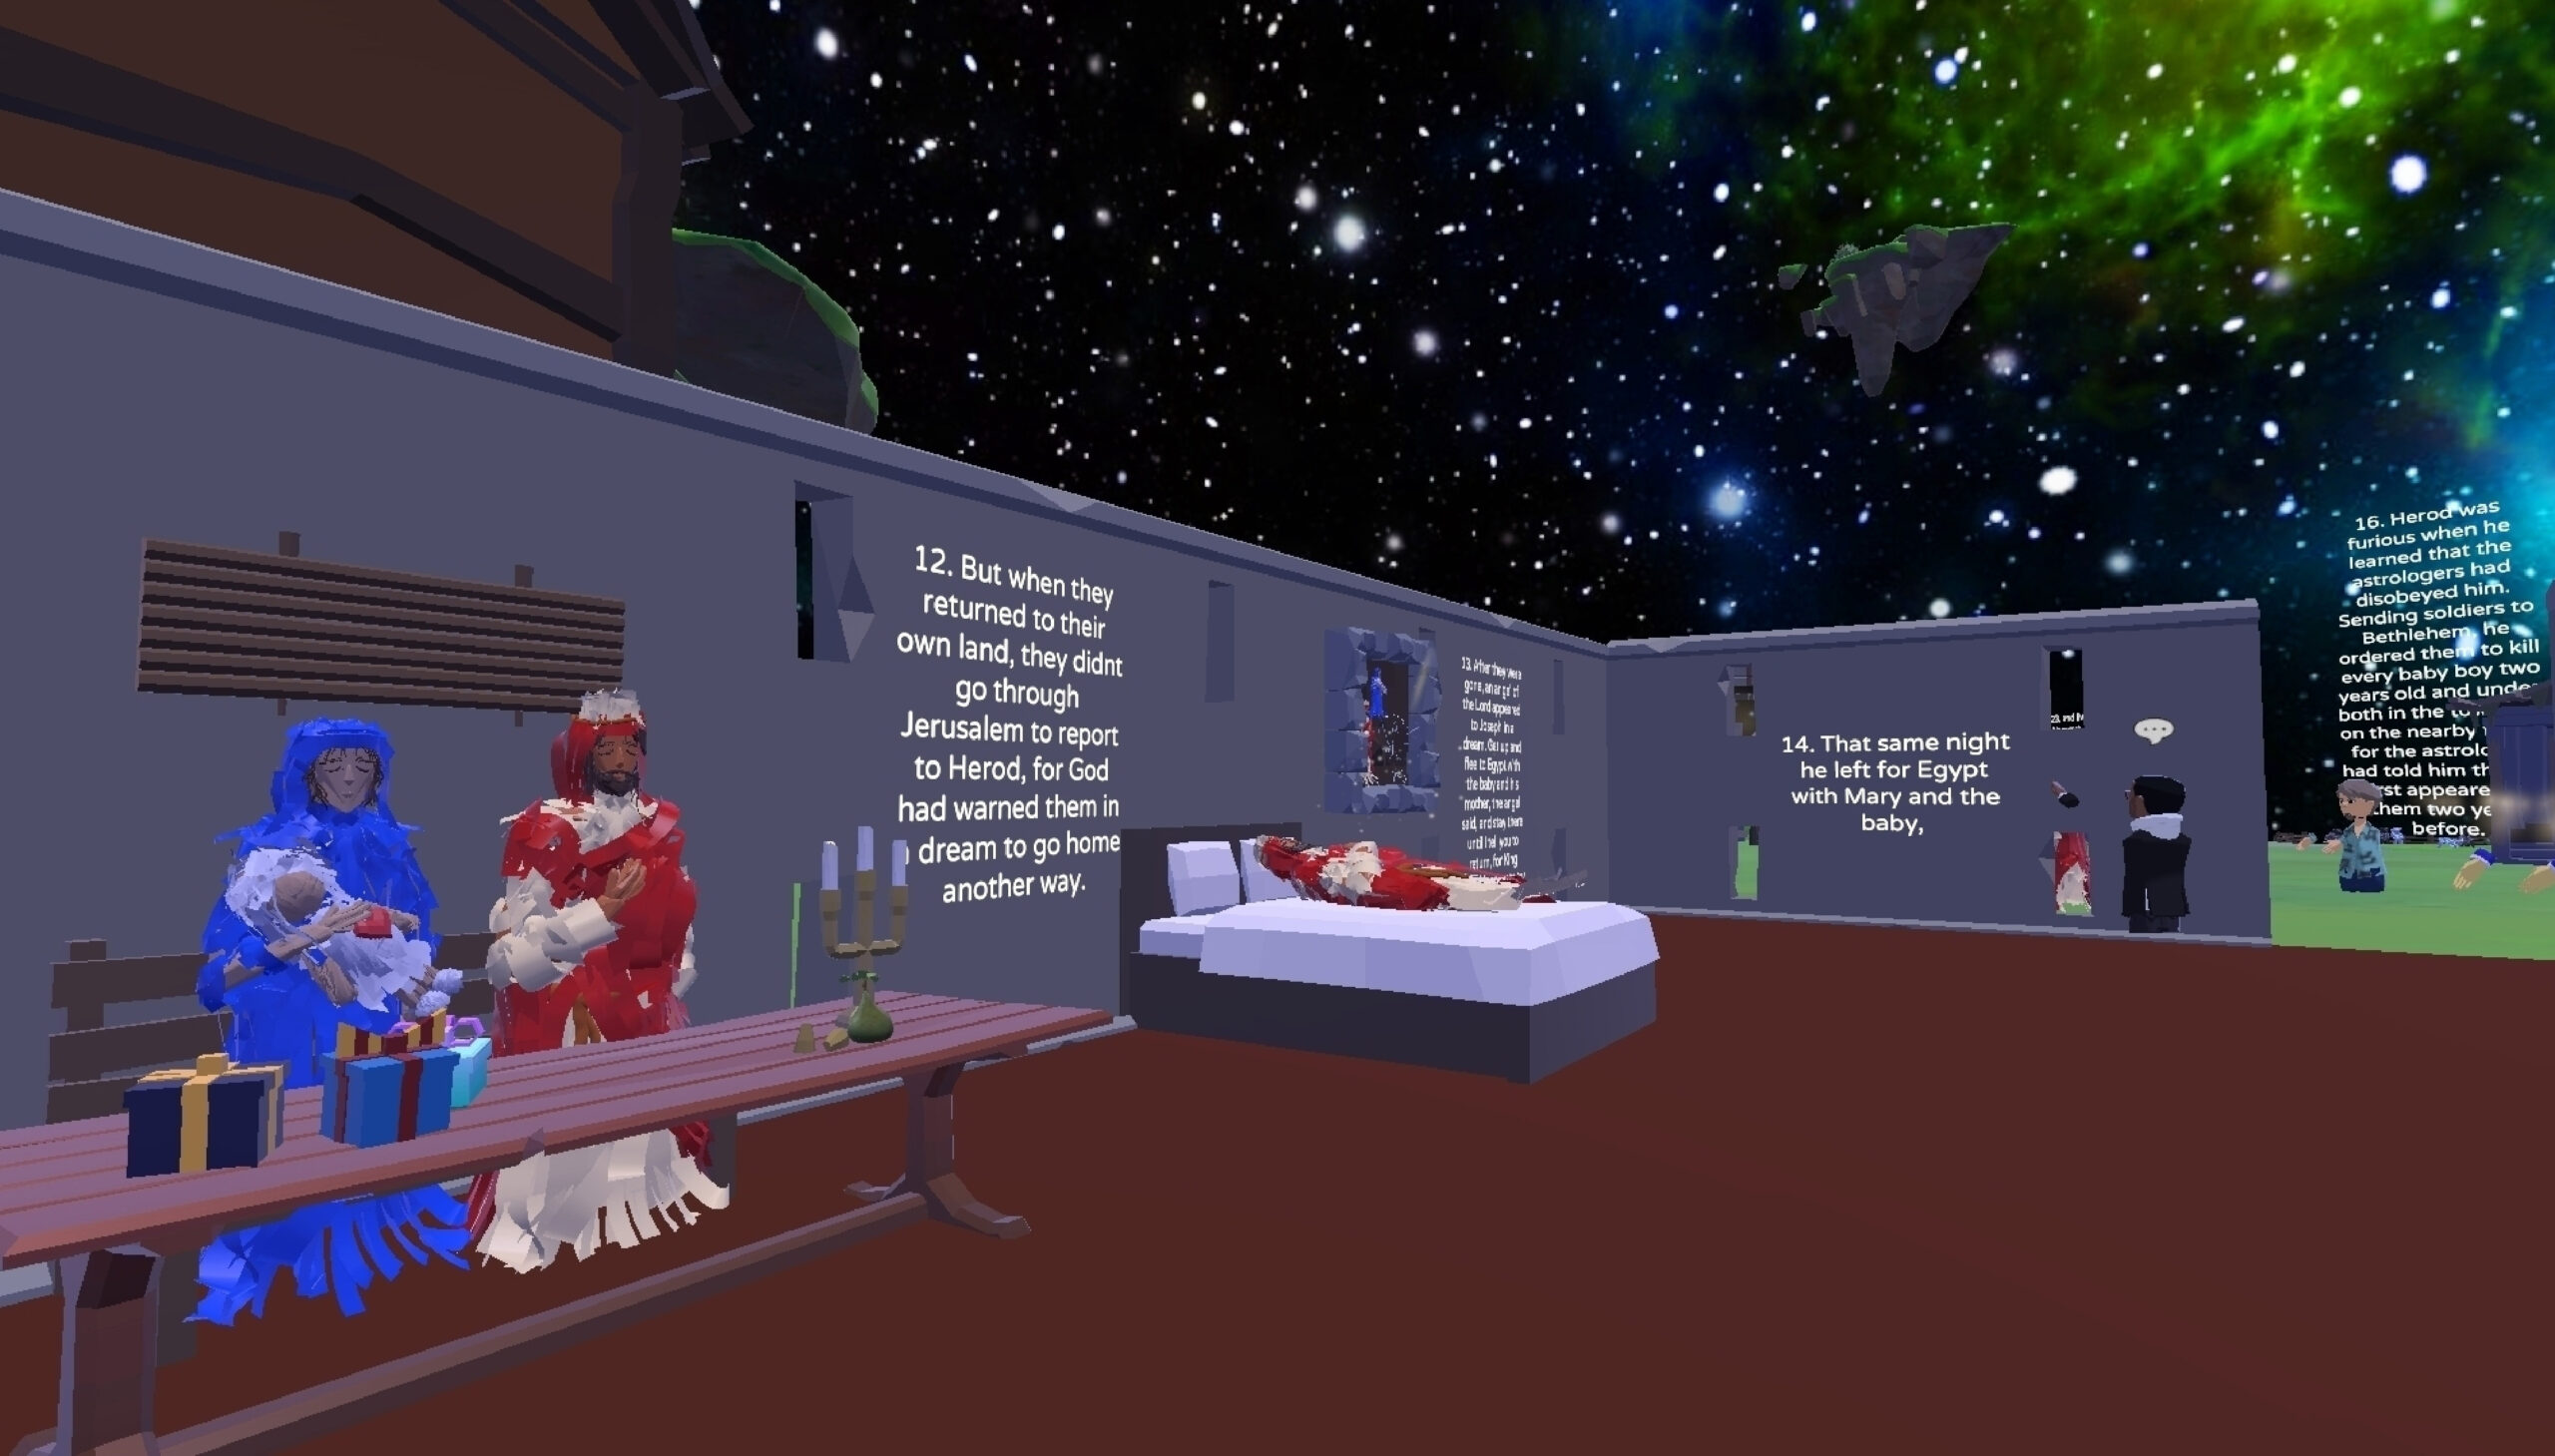 A virtual reality worship service is hosted at VR Church on Sunday, Jan. 23, 2022. VR Church was launched by Soto in 2016 and has gained traction in the metaverse, with attendance growing rapidly during the coronavirus pandemic as many services moved online. (VR Church via AP)